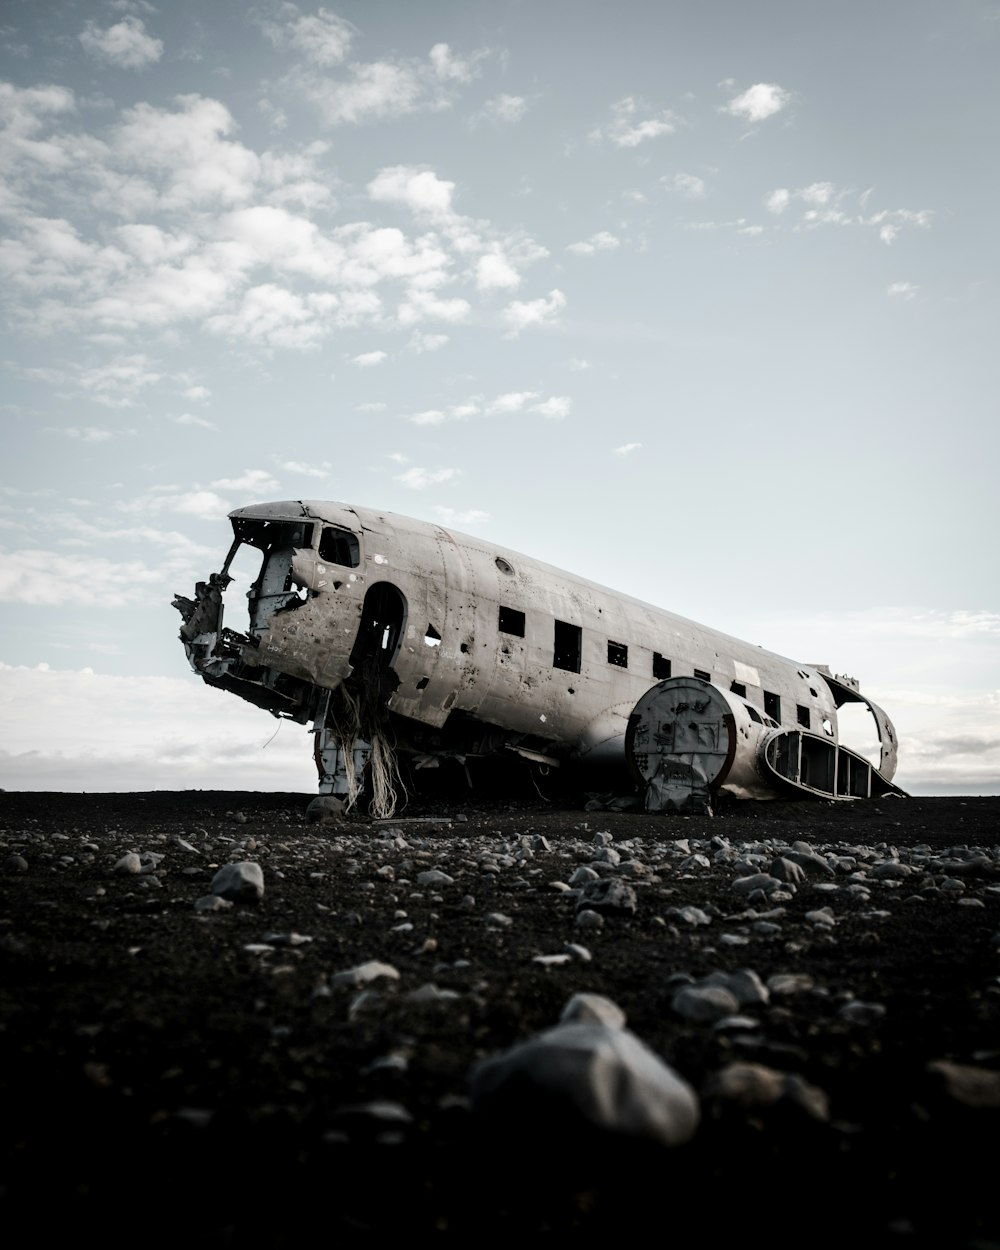 wrecked airplane on gray rocky ground under blue and white sunny cloudy sky during daytime